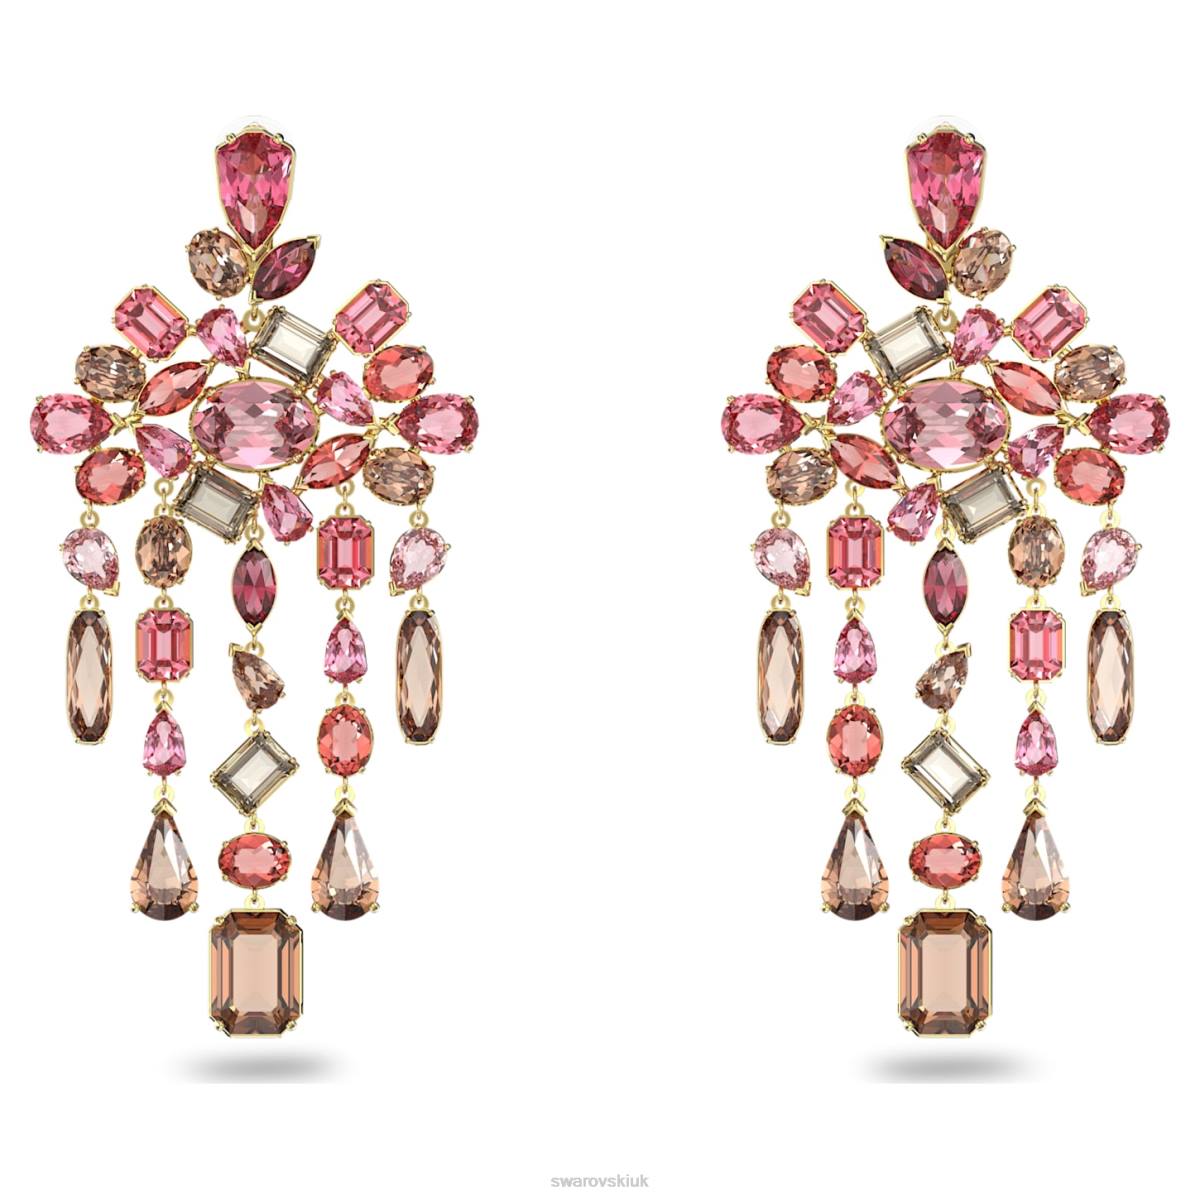 Jewelry Swarovski Gema clip earrings Mixed cuts, Chandelier, Multicolored, Gold-tone plated 48JX945